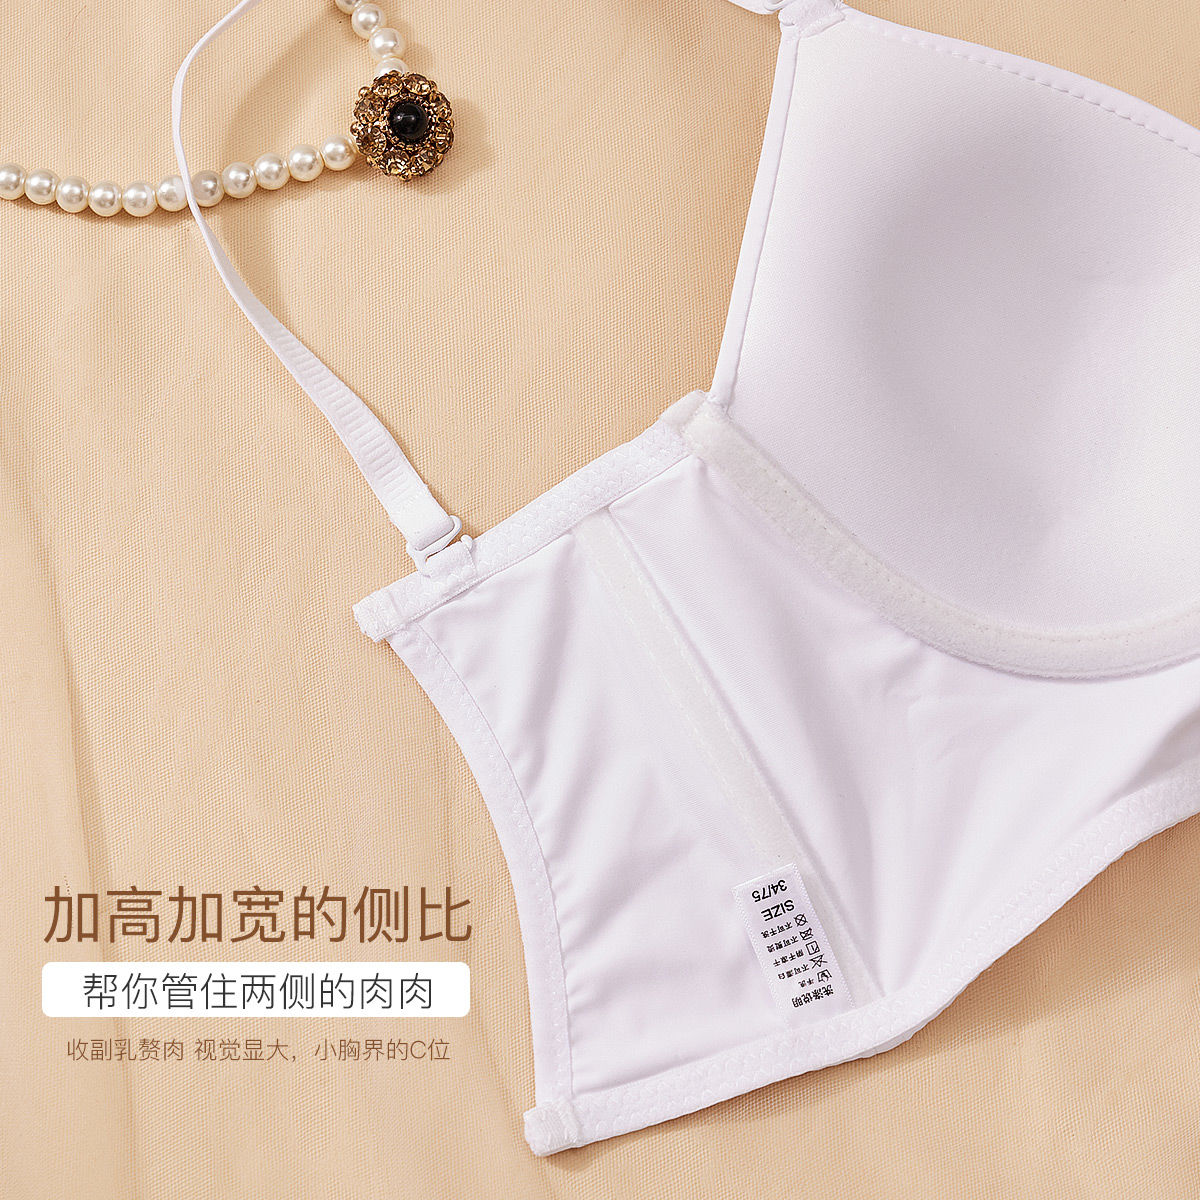 Aishuke one-word buckle sling beautiful back underwear women's photosensitive surface no trace outer wear bra with breast support bra